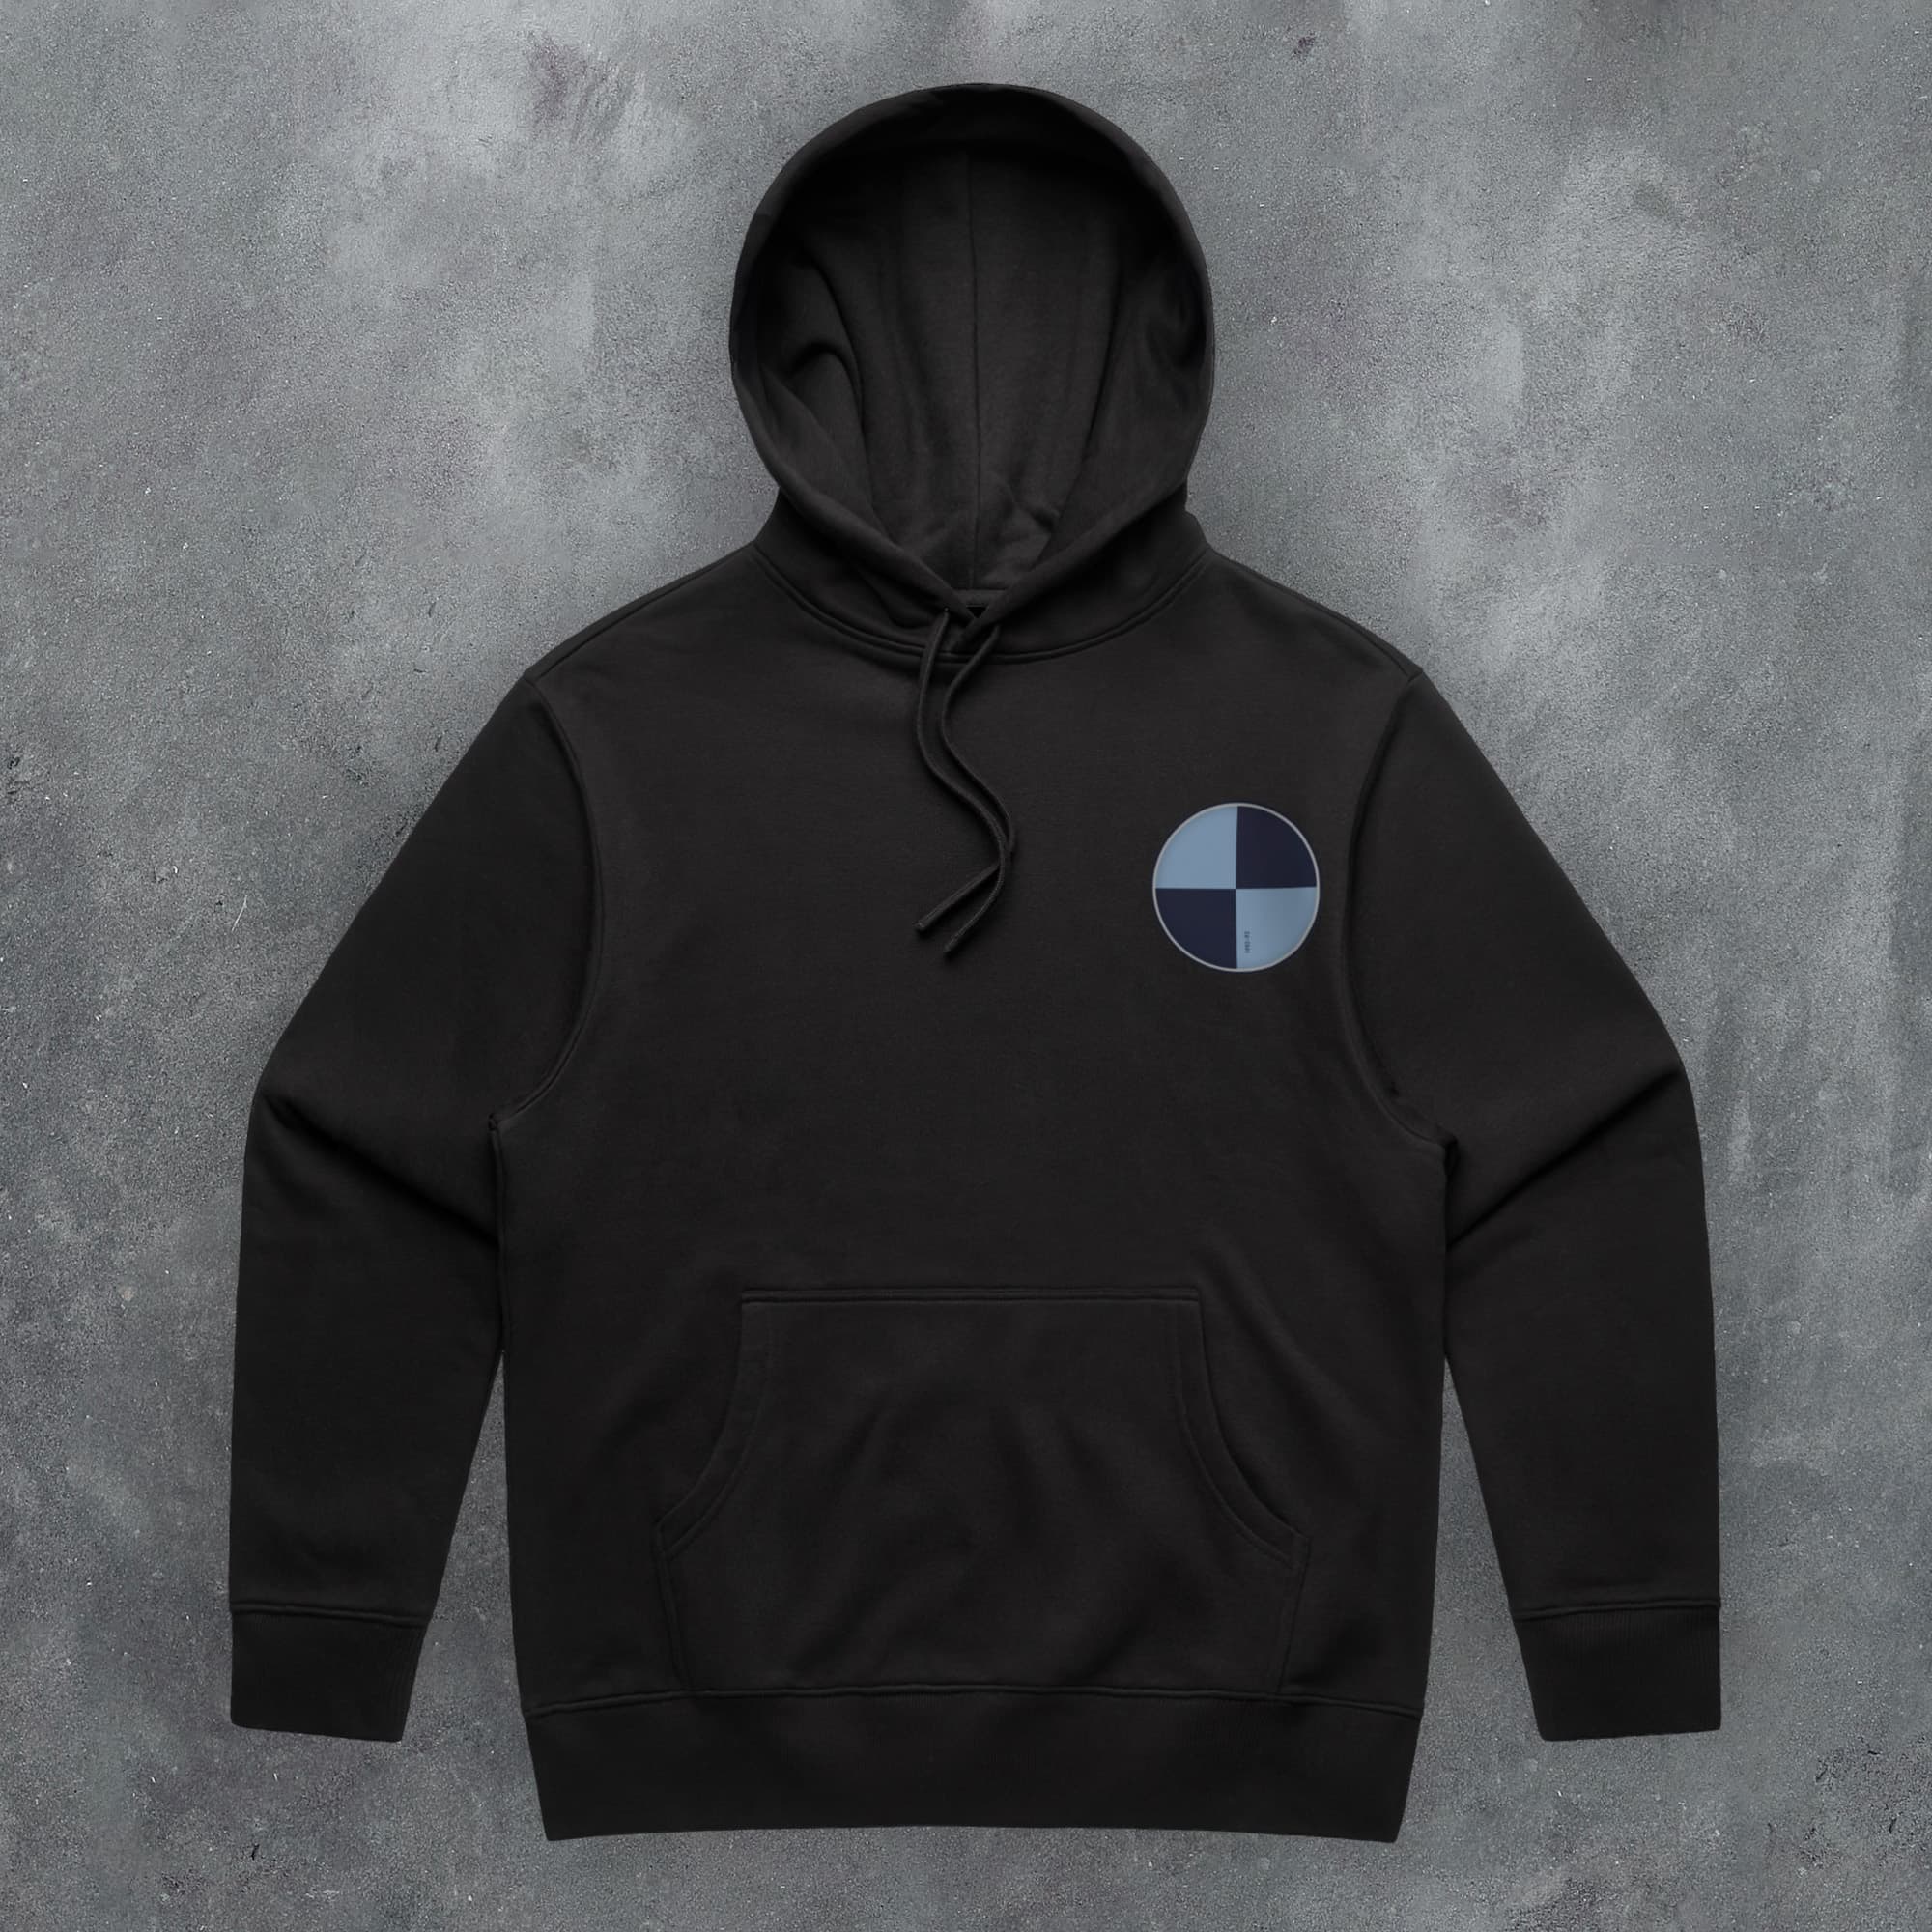 a black hoodie with a blue cross on it